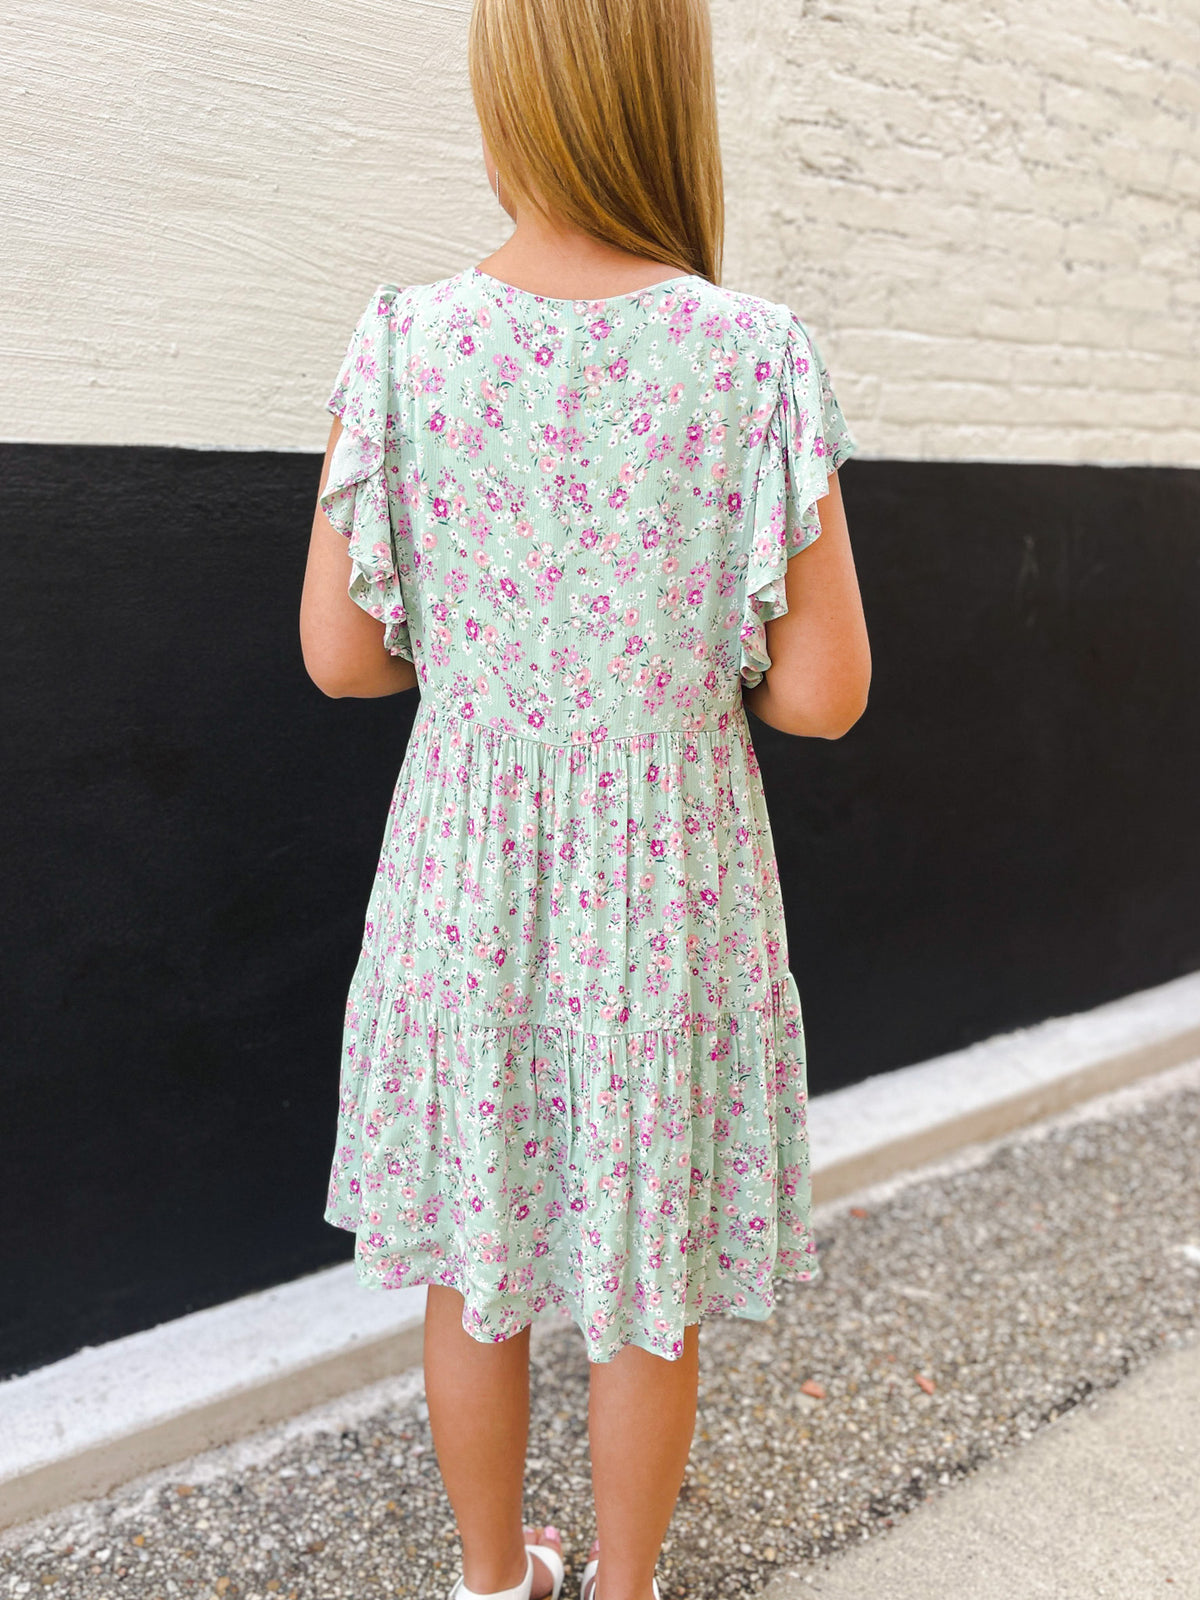 SAGE FLORAL DRESS W/ TIERED SKIRT AND RUFFLE SLEEVE